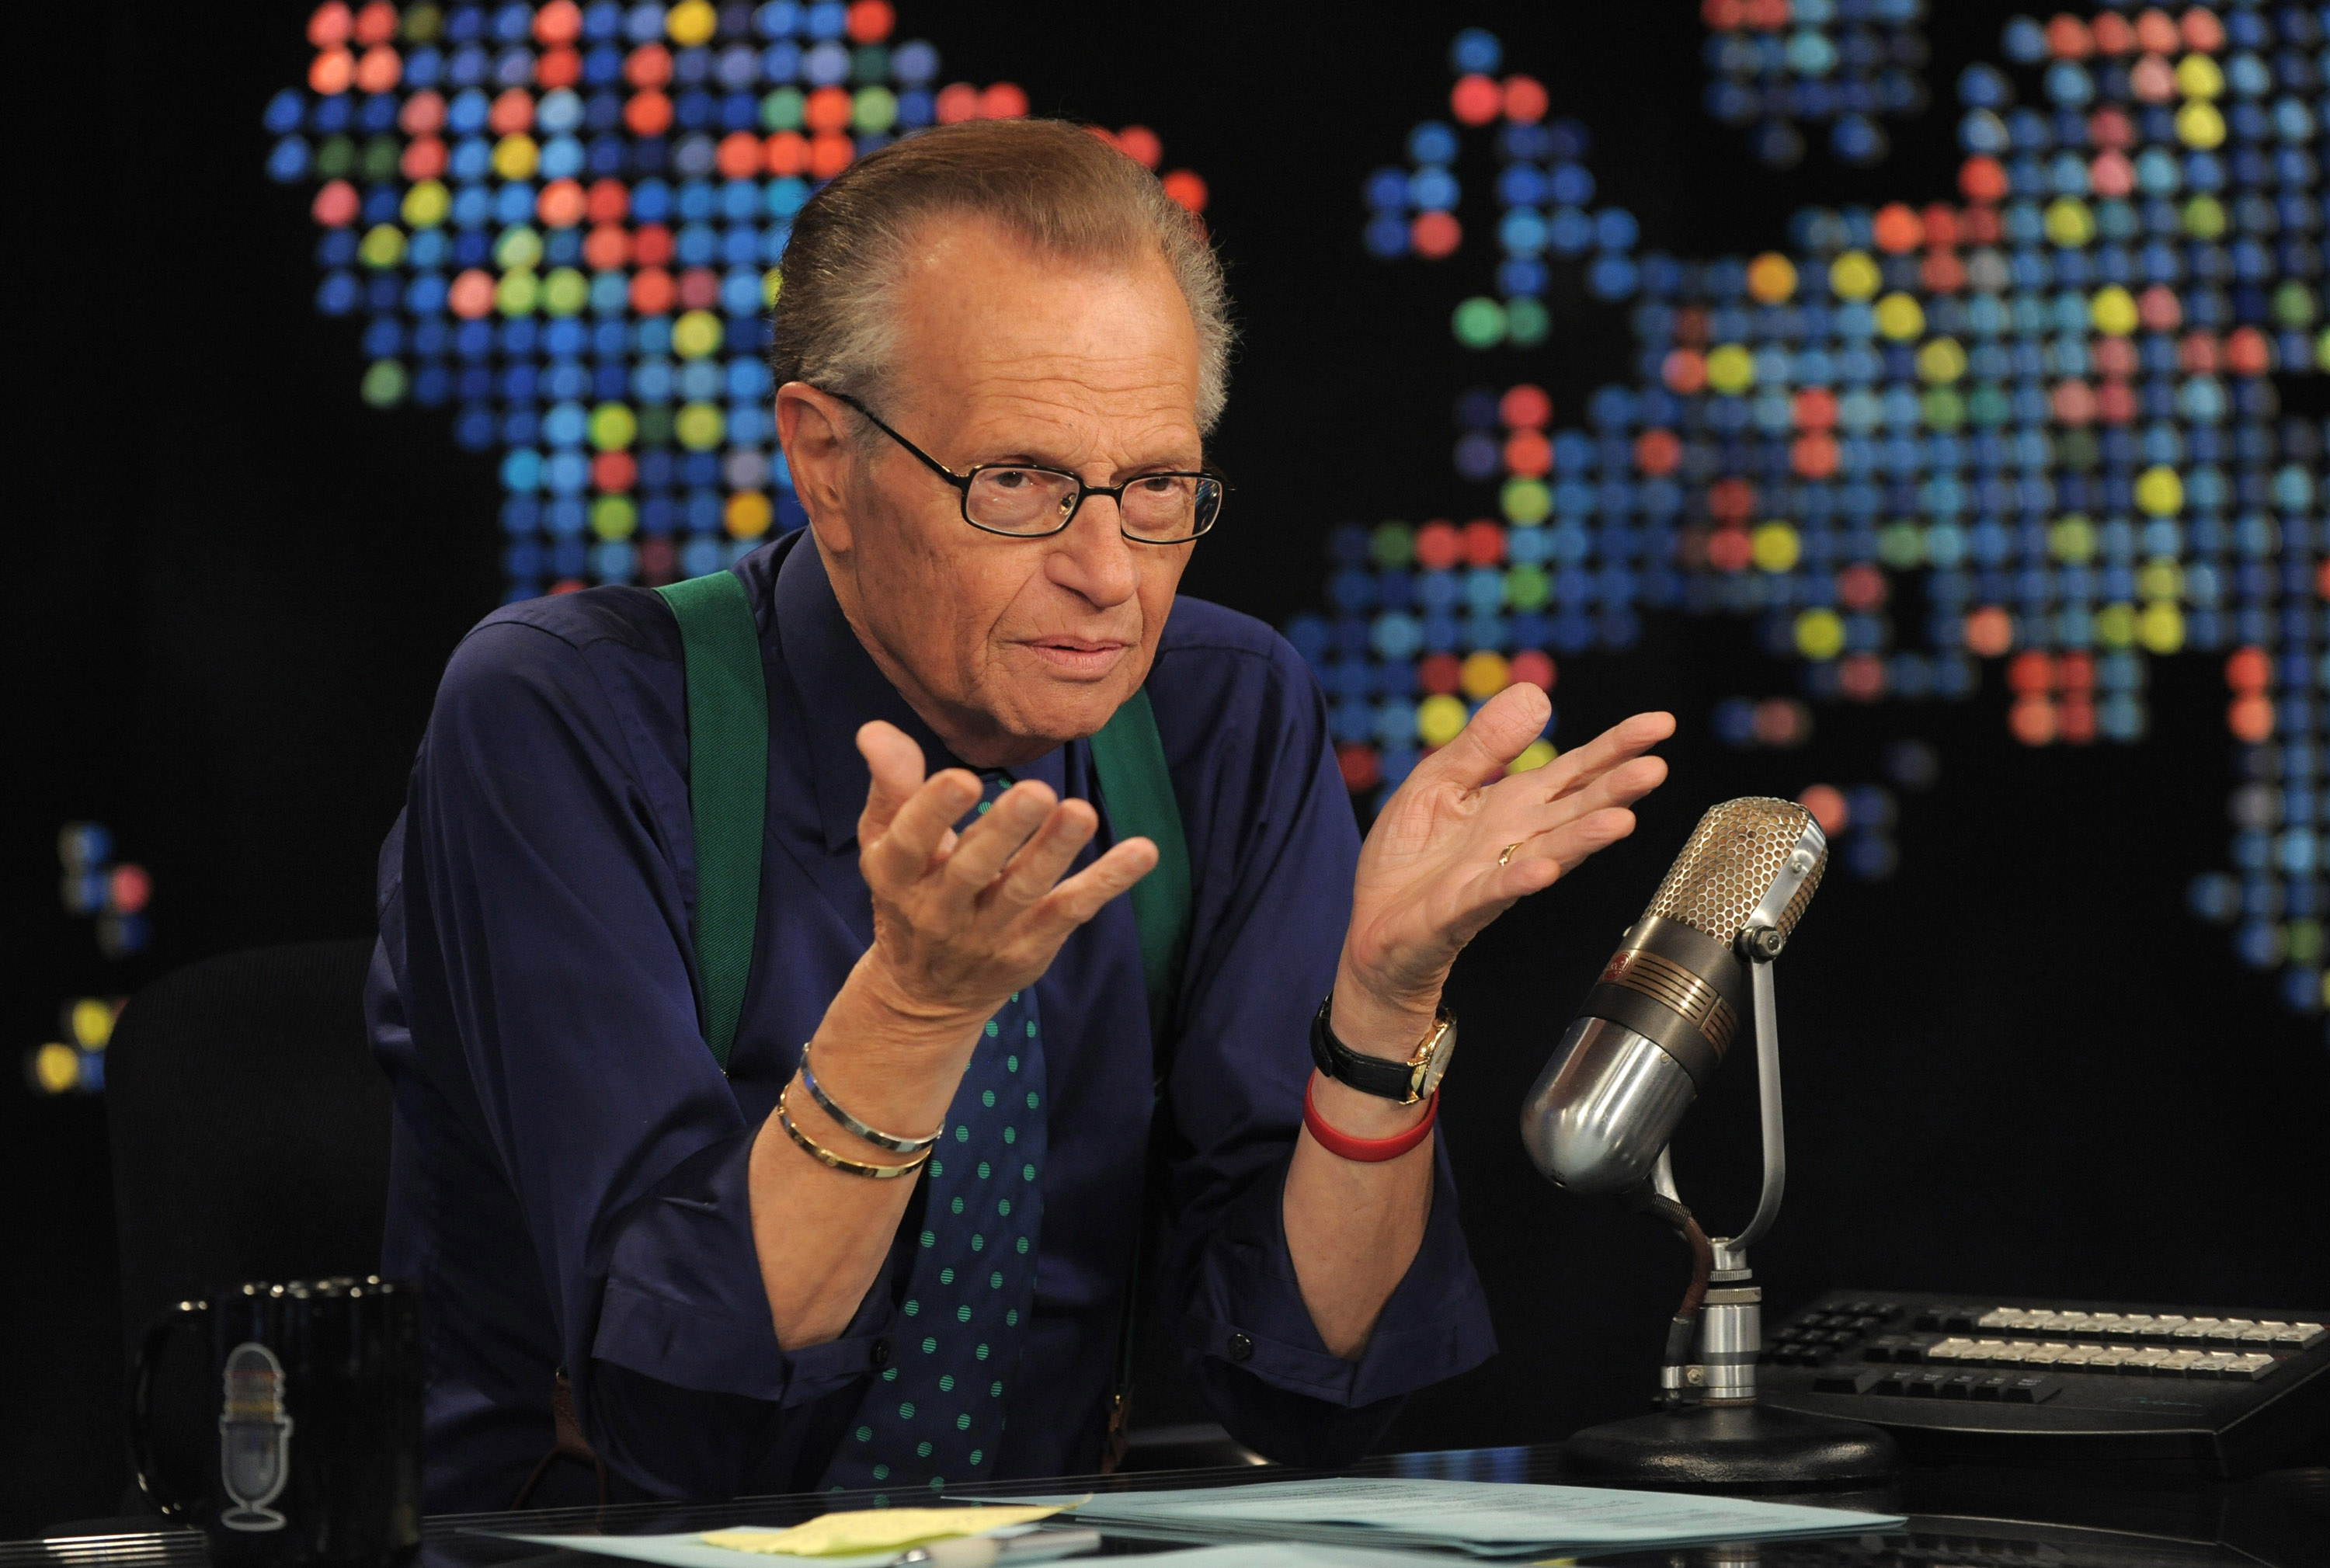 Larry King sitting in front of a microphone on his TV show